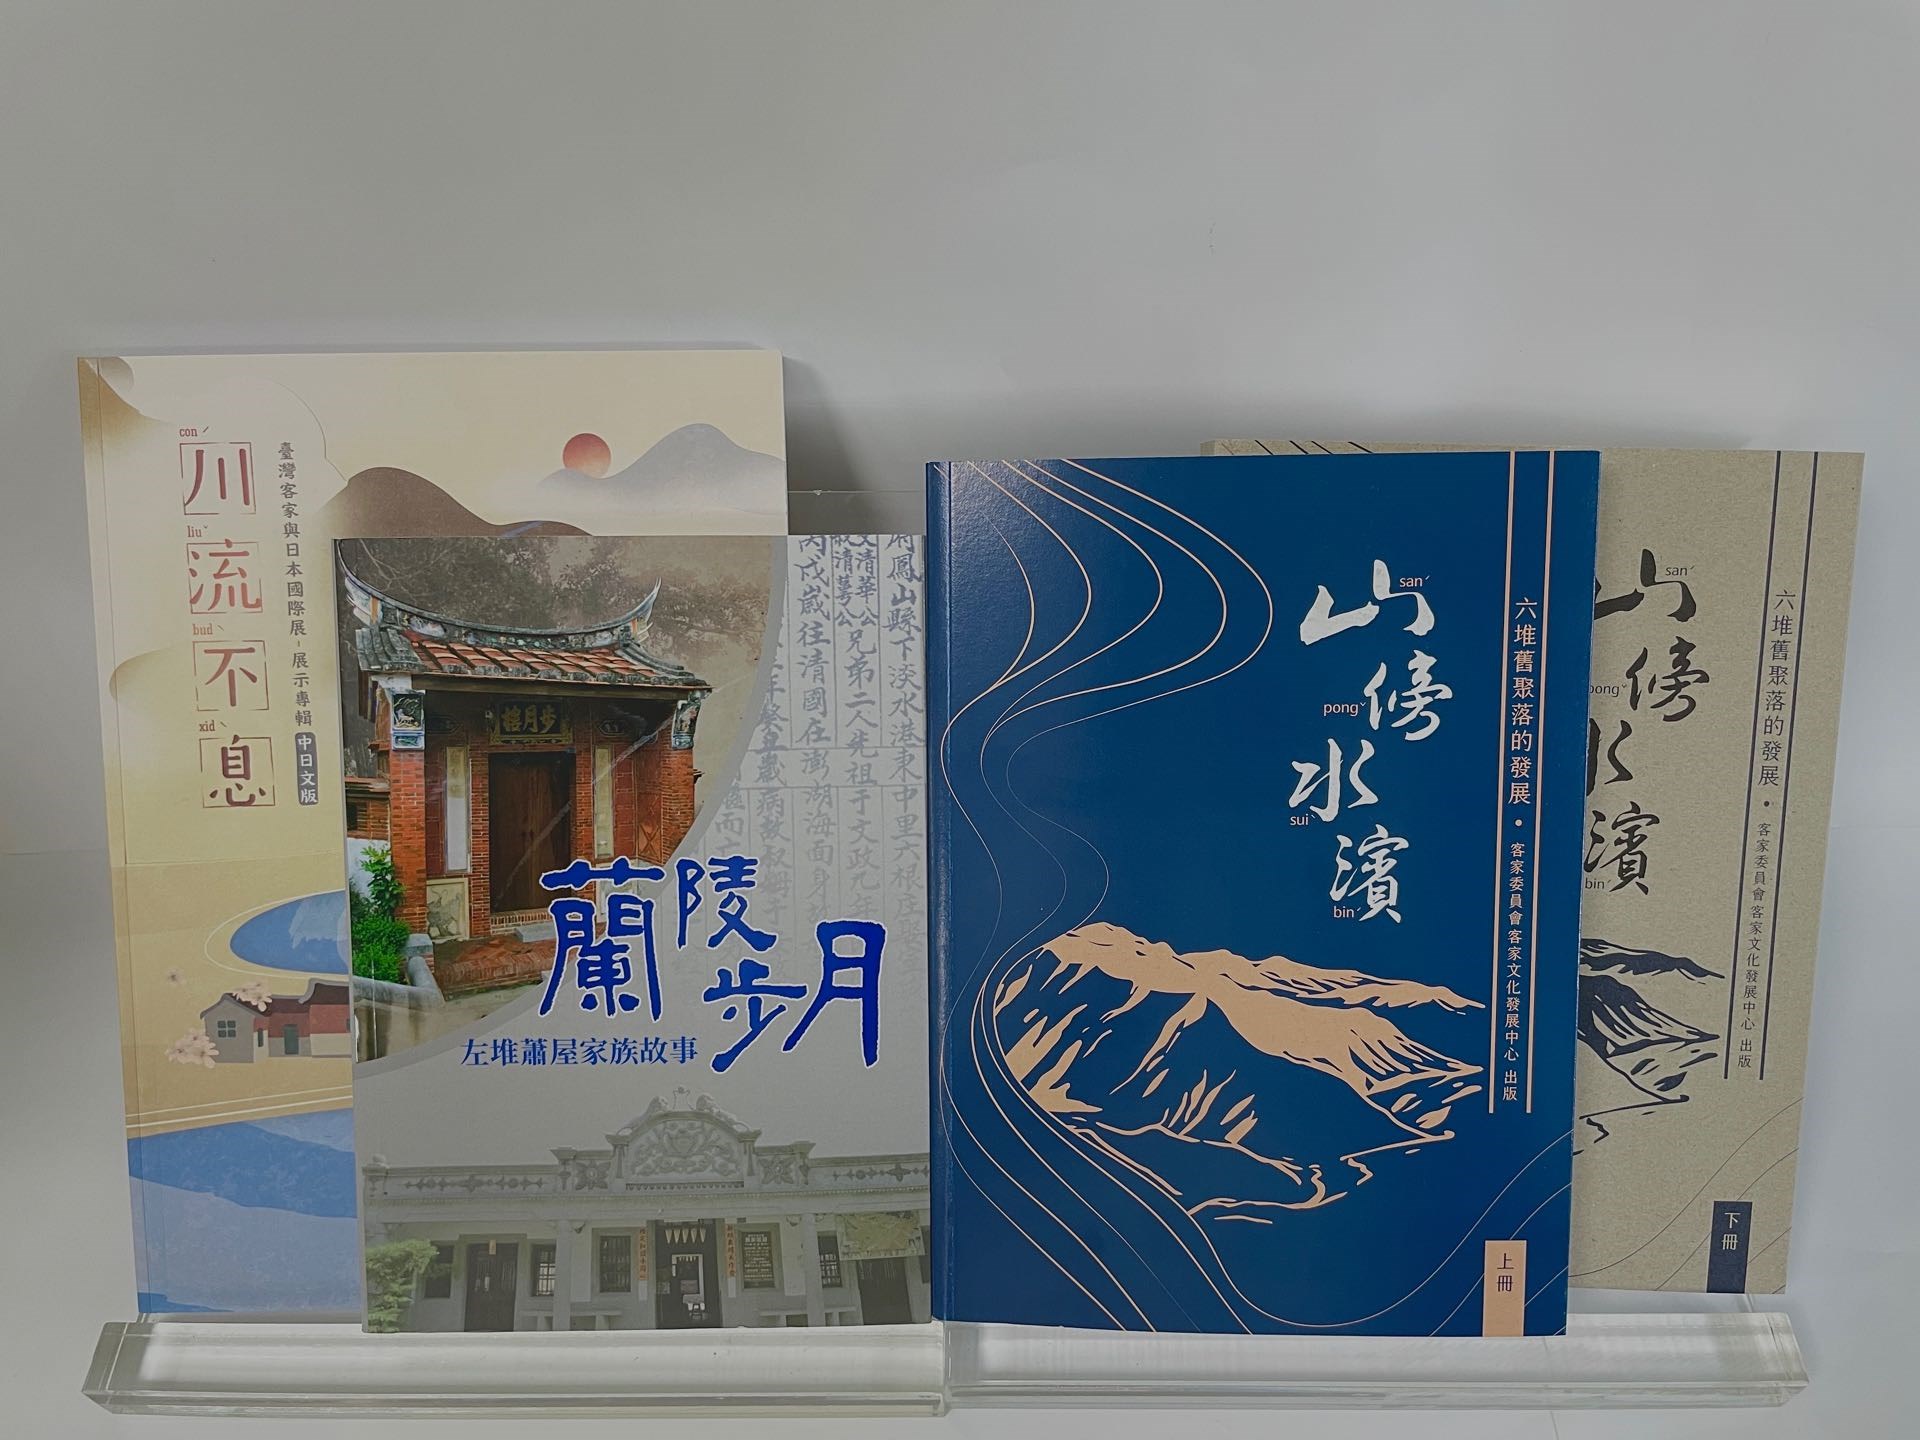 THCDC’s three publications  Taiwanese Hakka and Japan International Exhibition” won an award for “Published Documents and Books of 2023